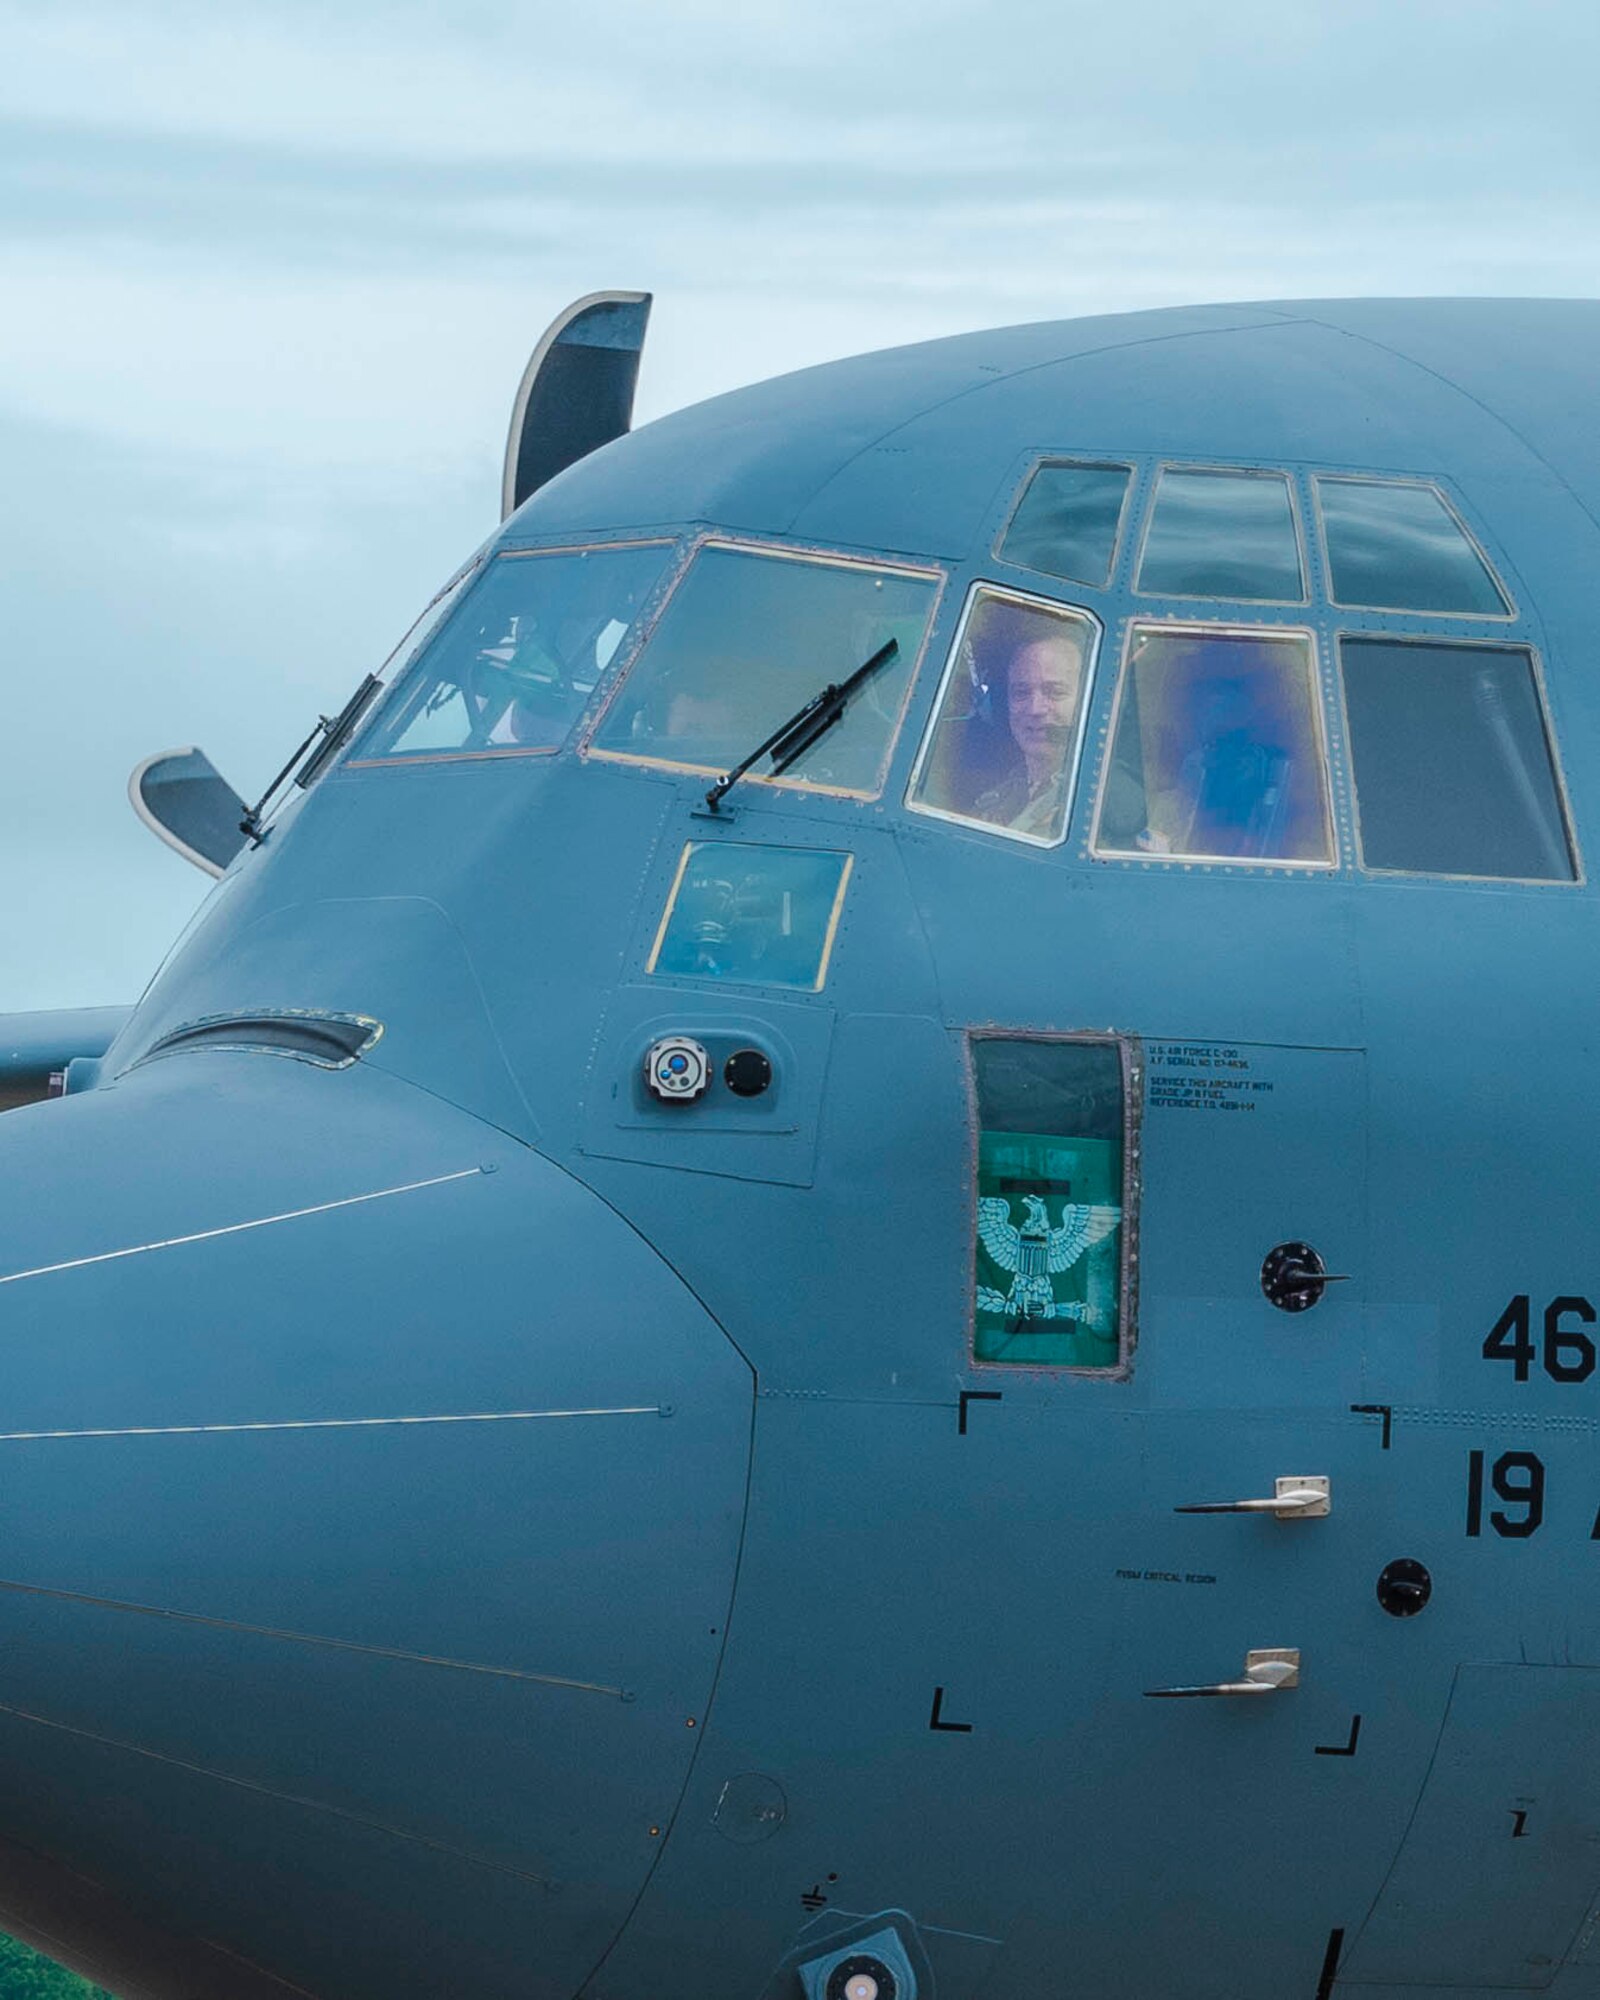 U.S. Air Force Reserve Col. Anthony Brusca, 913th Airlift Group deputy commander, completes the aircraft shutdown procedure for his last flight in the Air Force at Little Rock Air Force Base, Ark. on May 3, 2019.